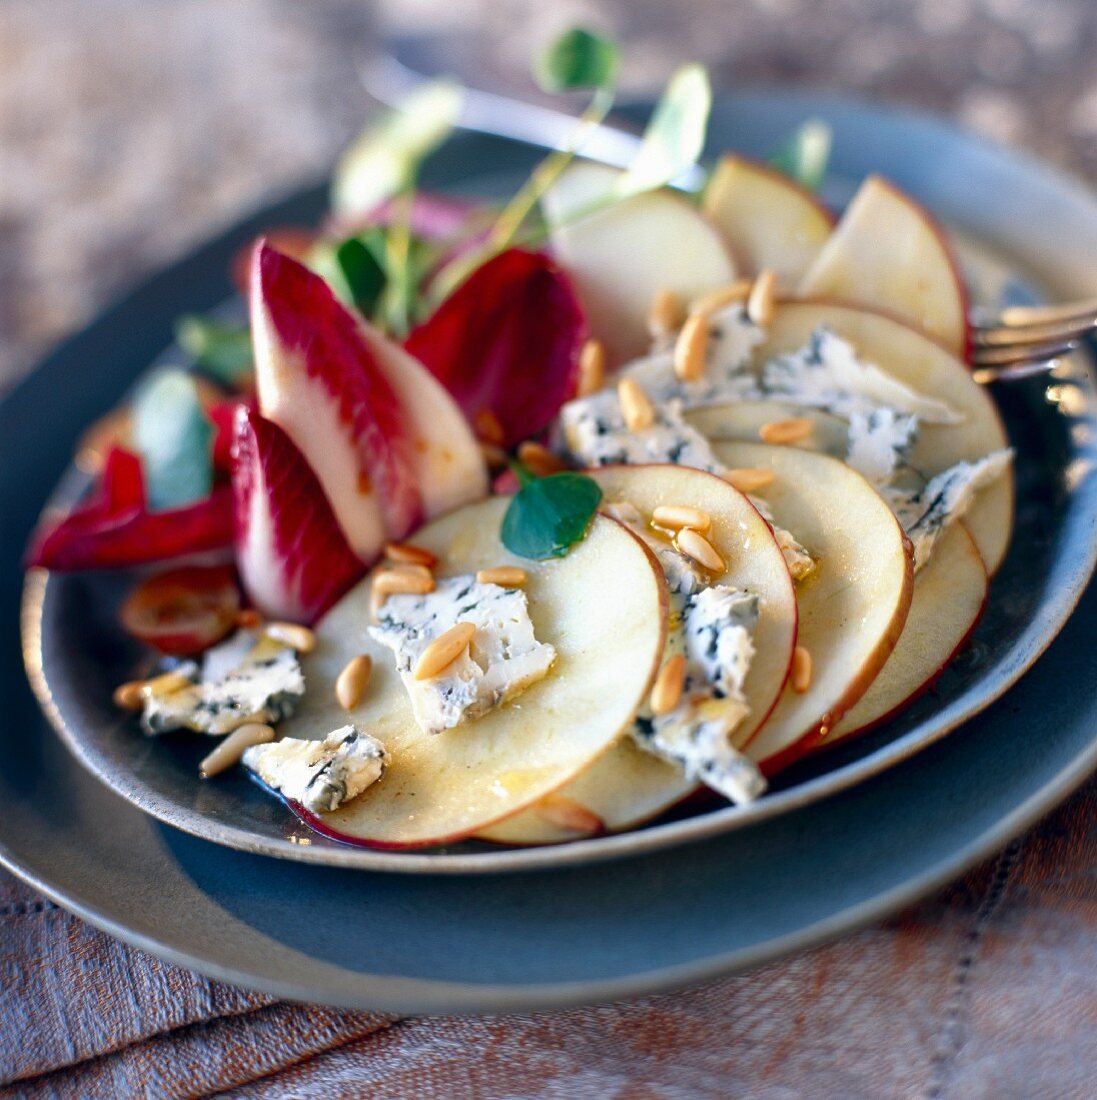 Apple, blue cheese and chicory salad